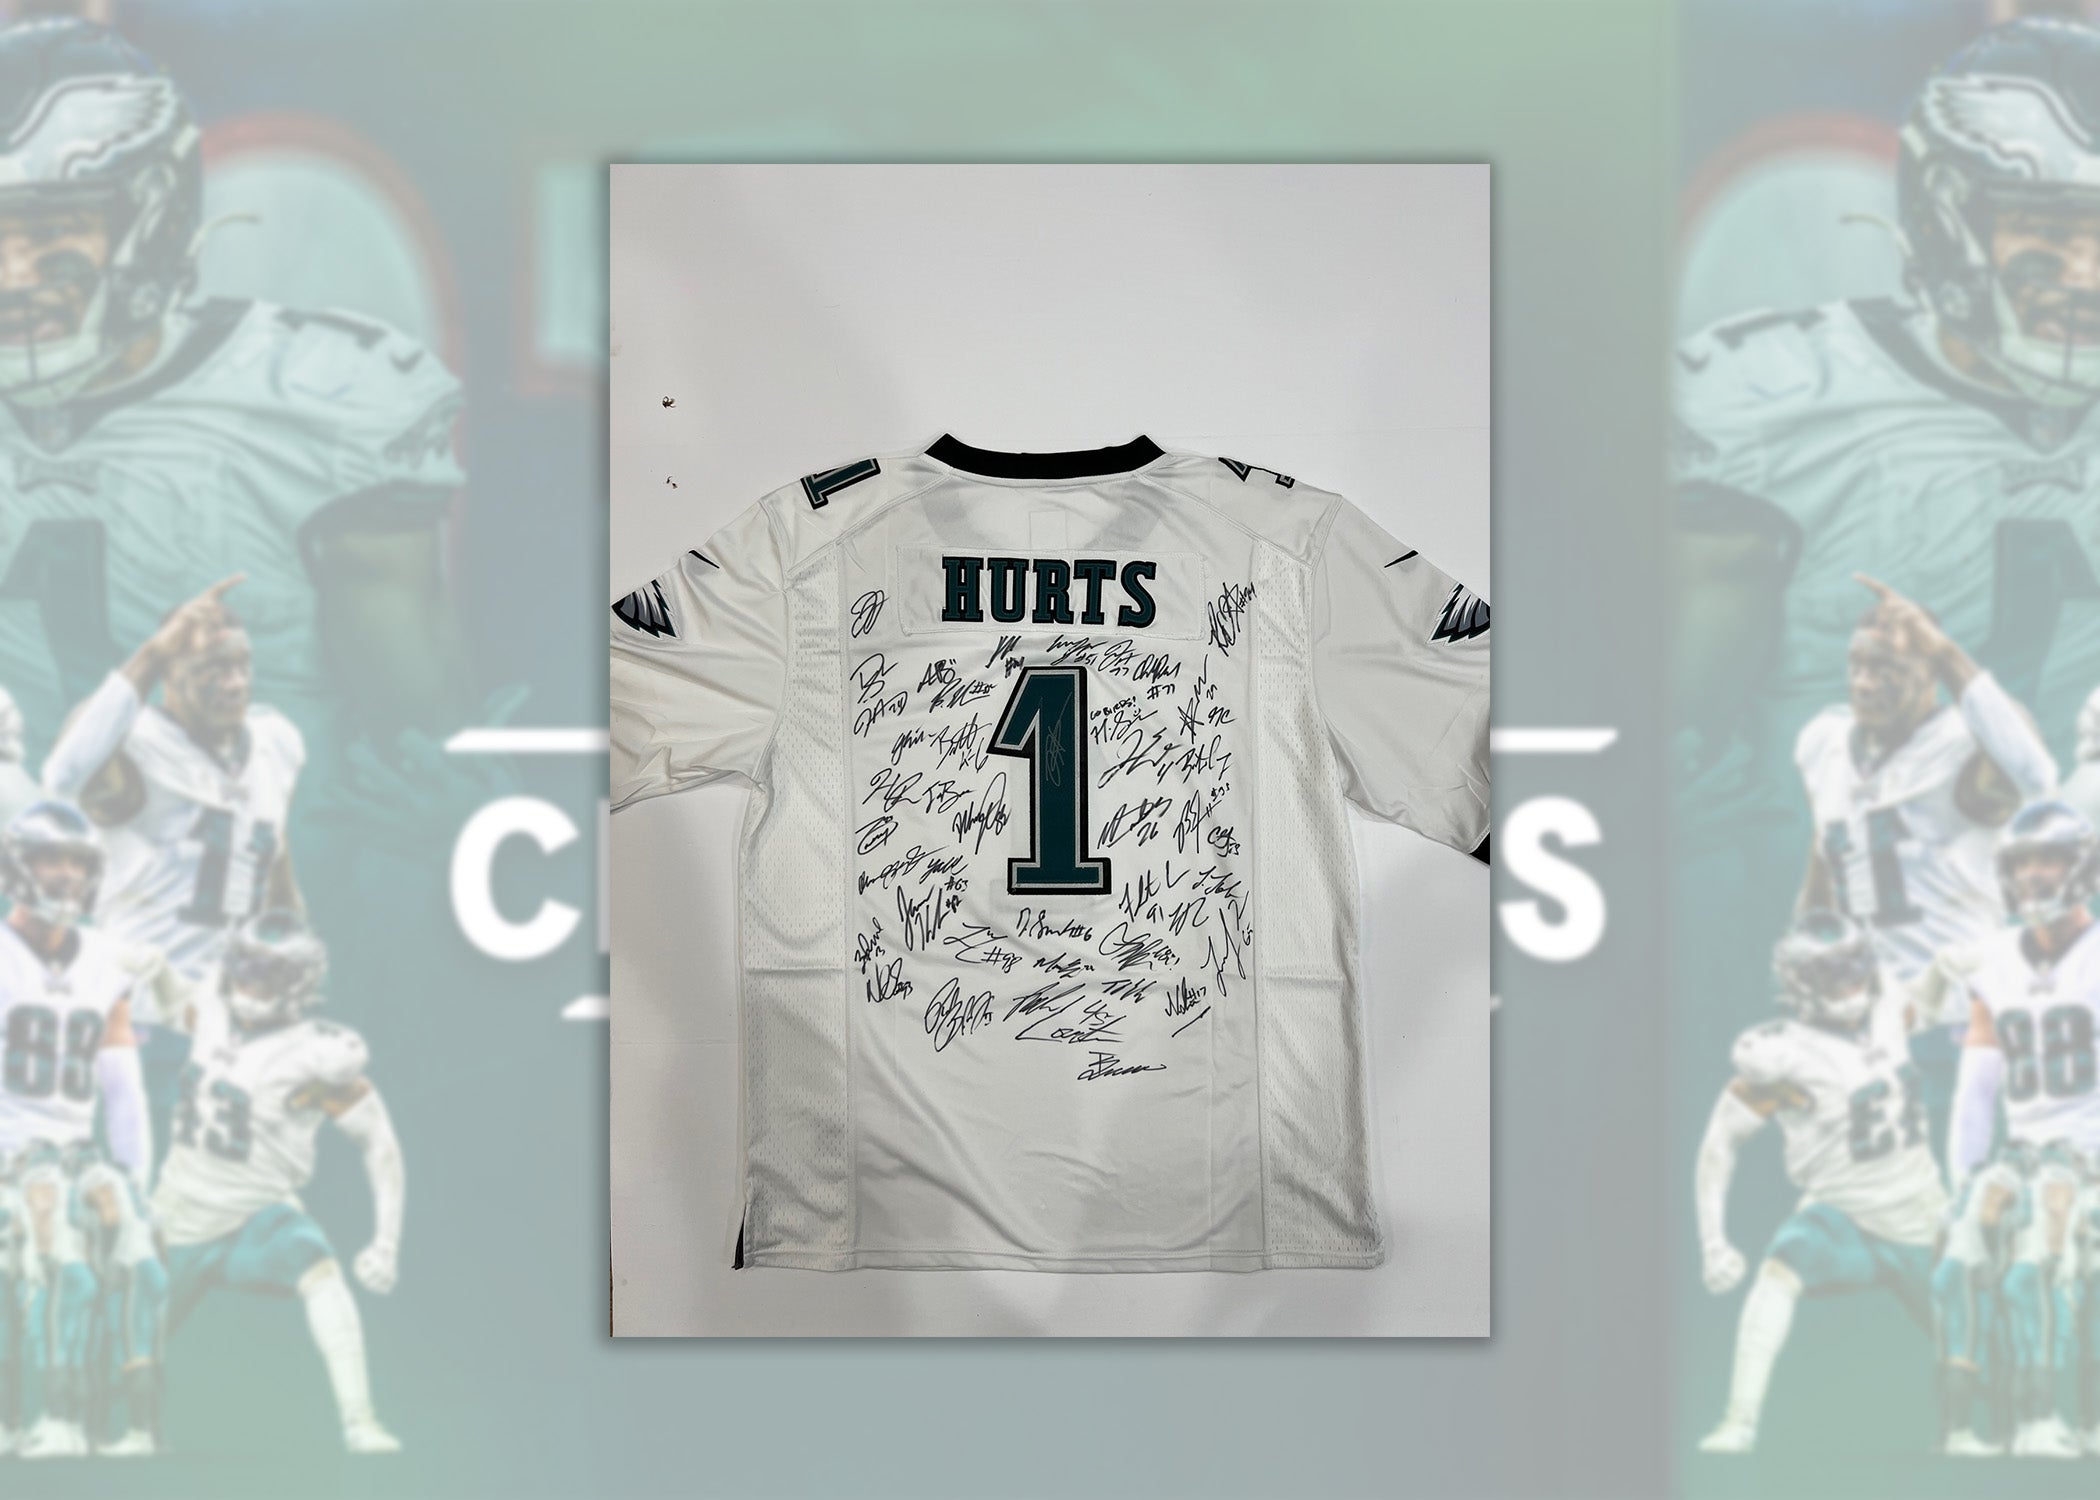 Where to get an official Jalen Hurts Philadelphia Eagles jersey